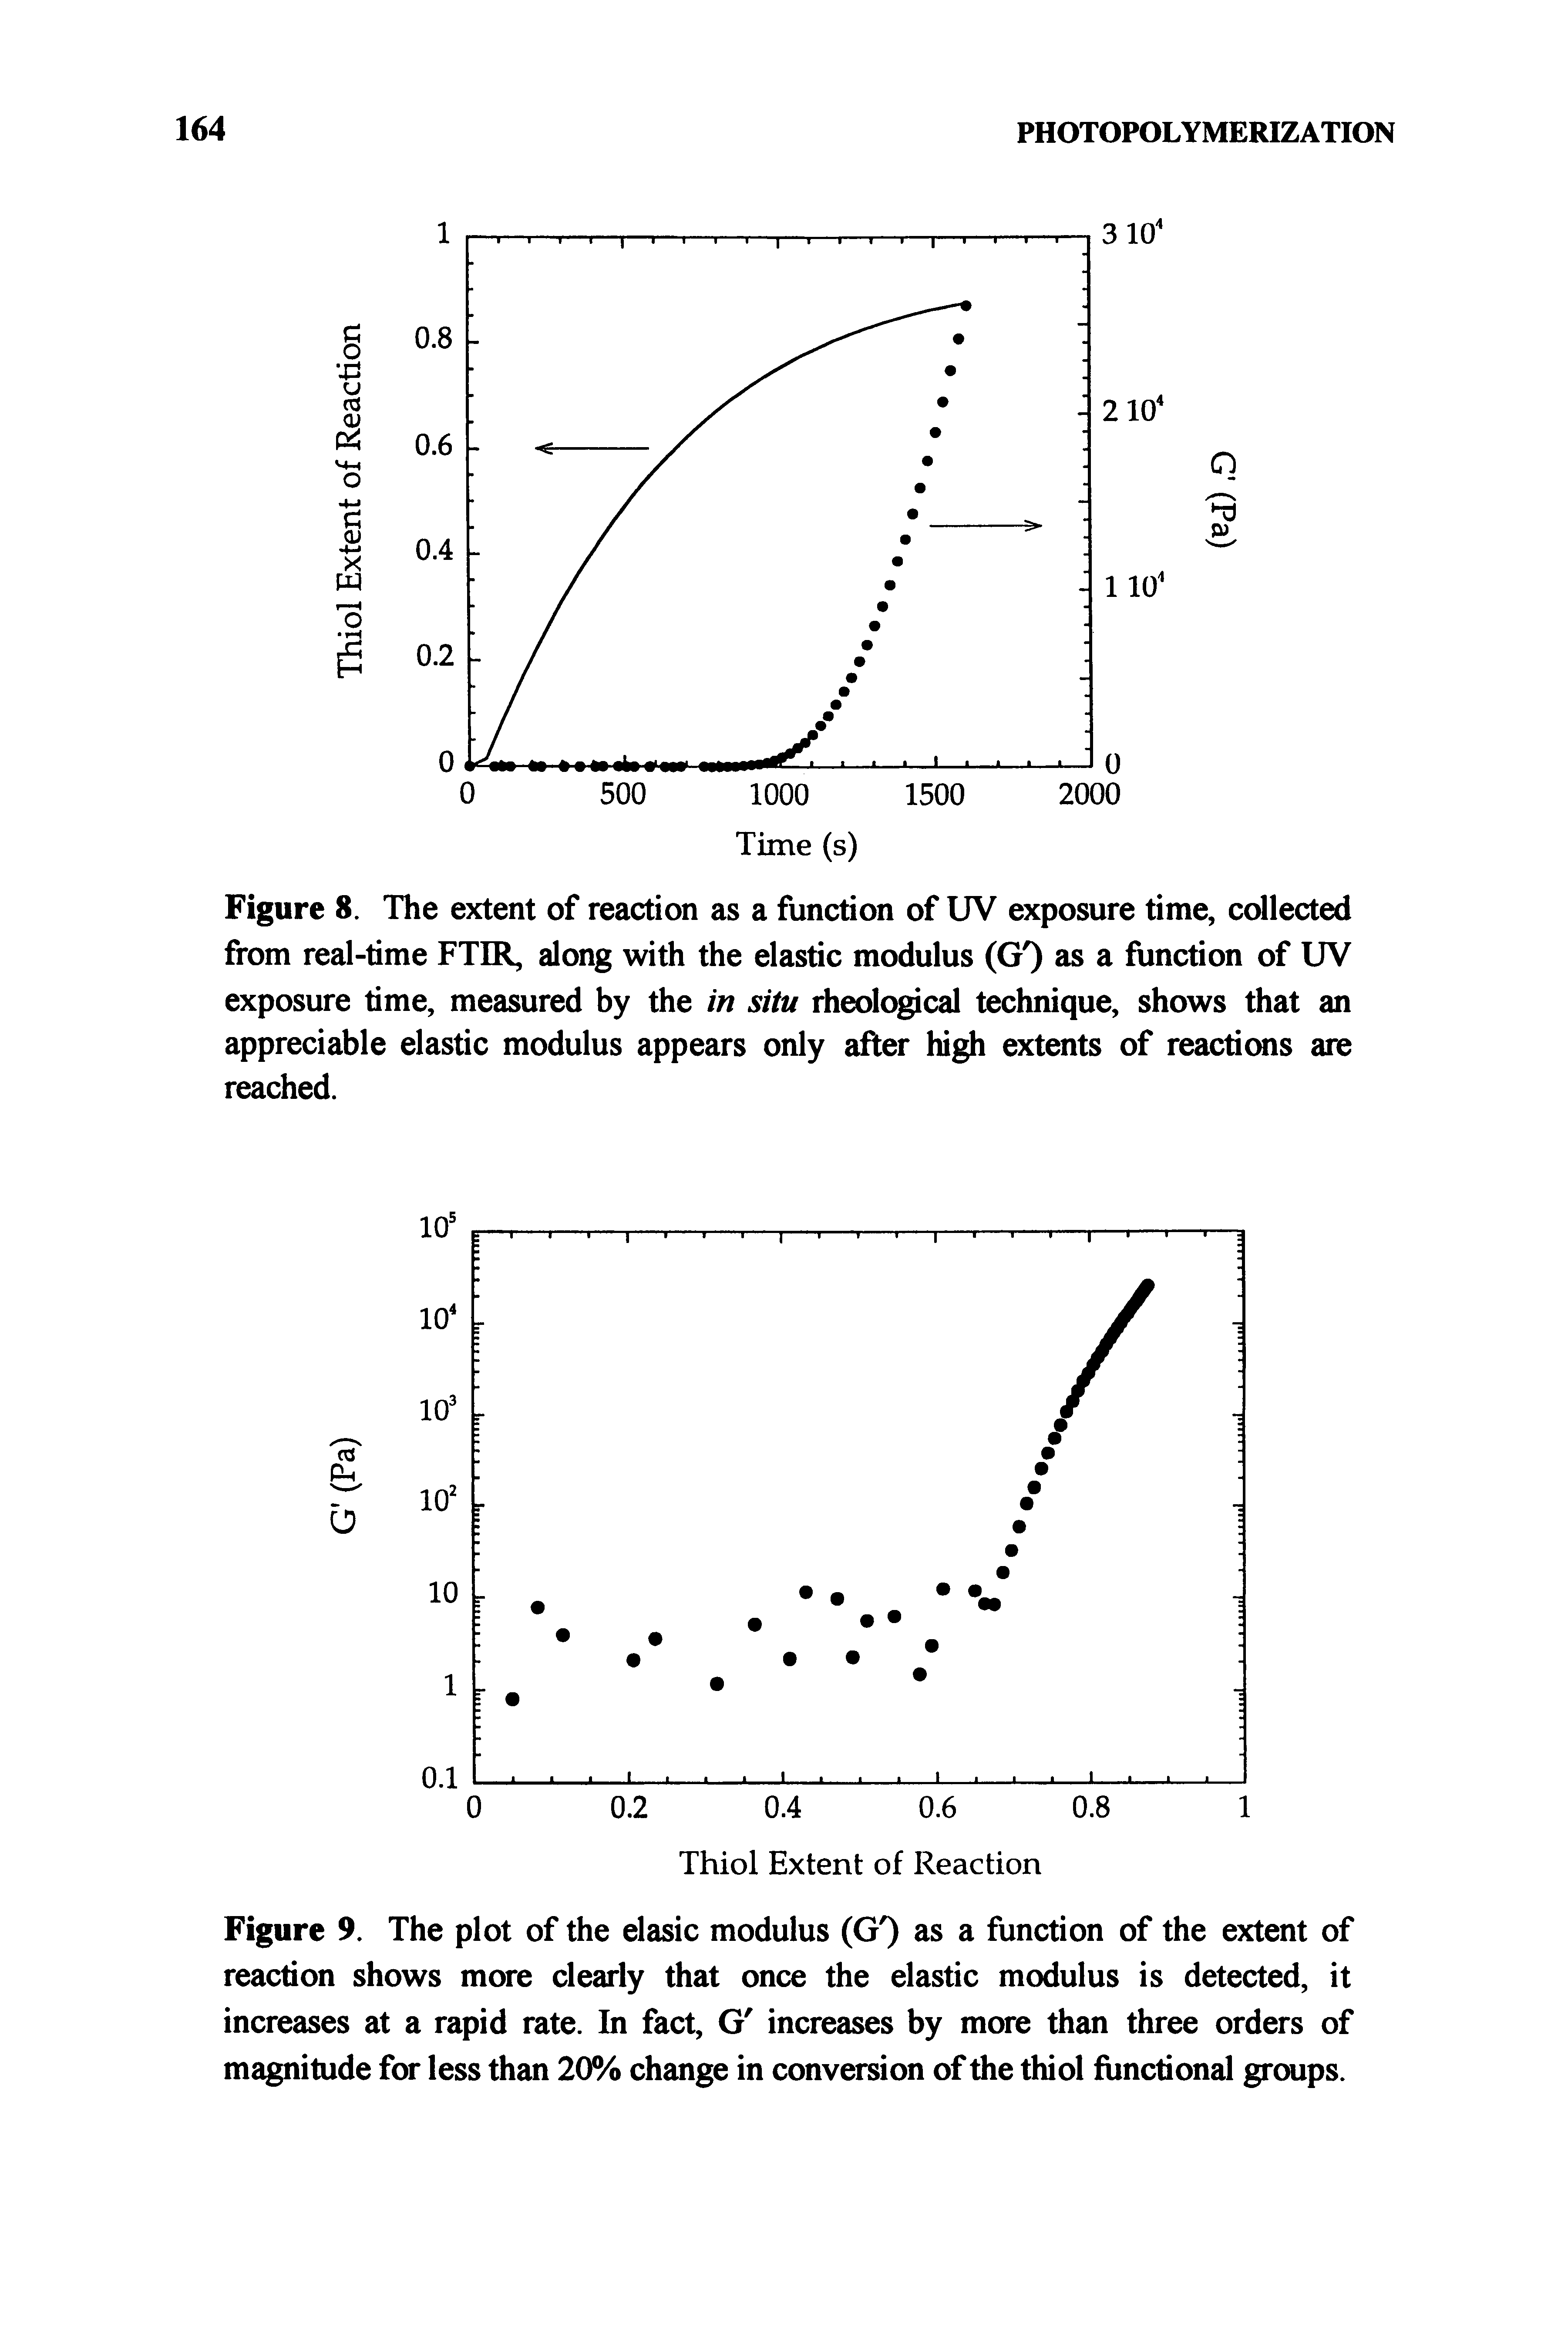 Figure 9. The plot of the elasic modulus (GO as a function of the extent of reaction shows more clearly that once the elastic modulus is detected, it increases at a rapid rate. In fact, G increases by more than three orders of magnitude for less than 20% change in conversion of the thiol functional groups.